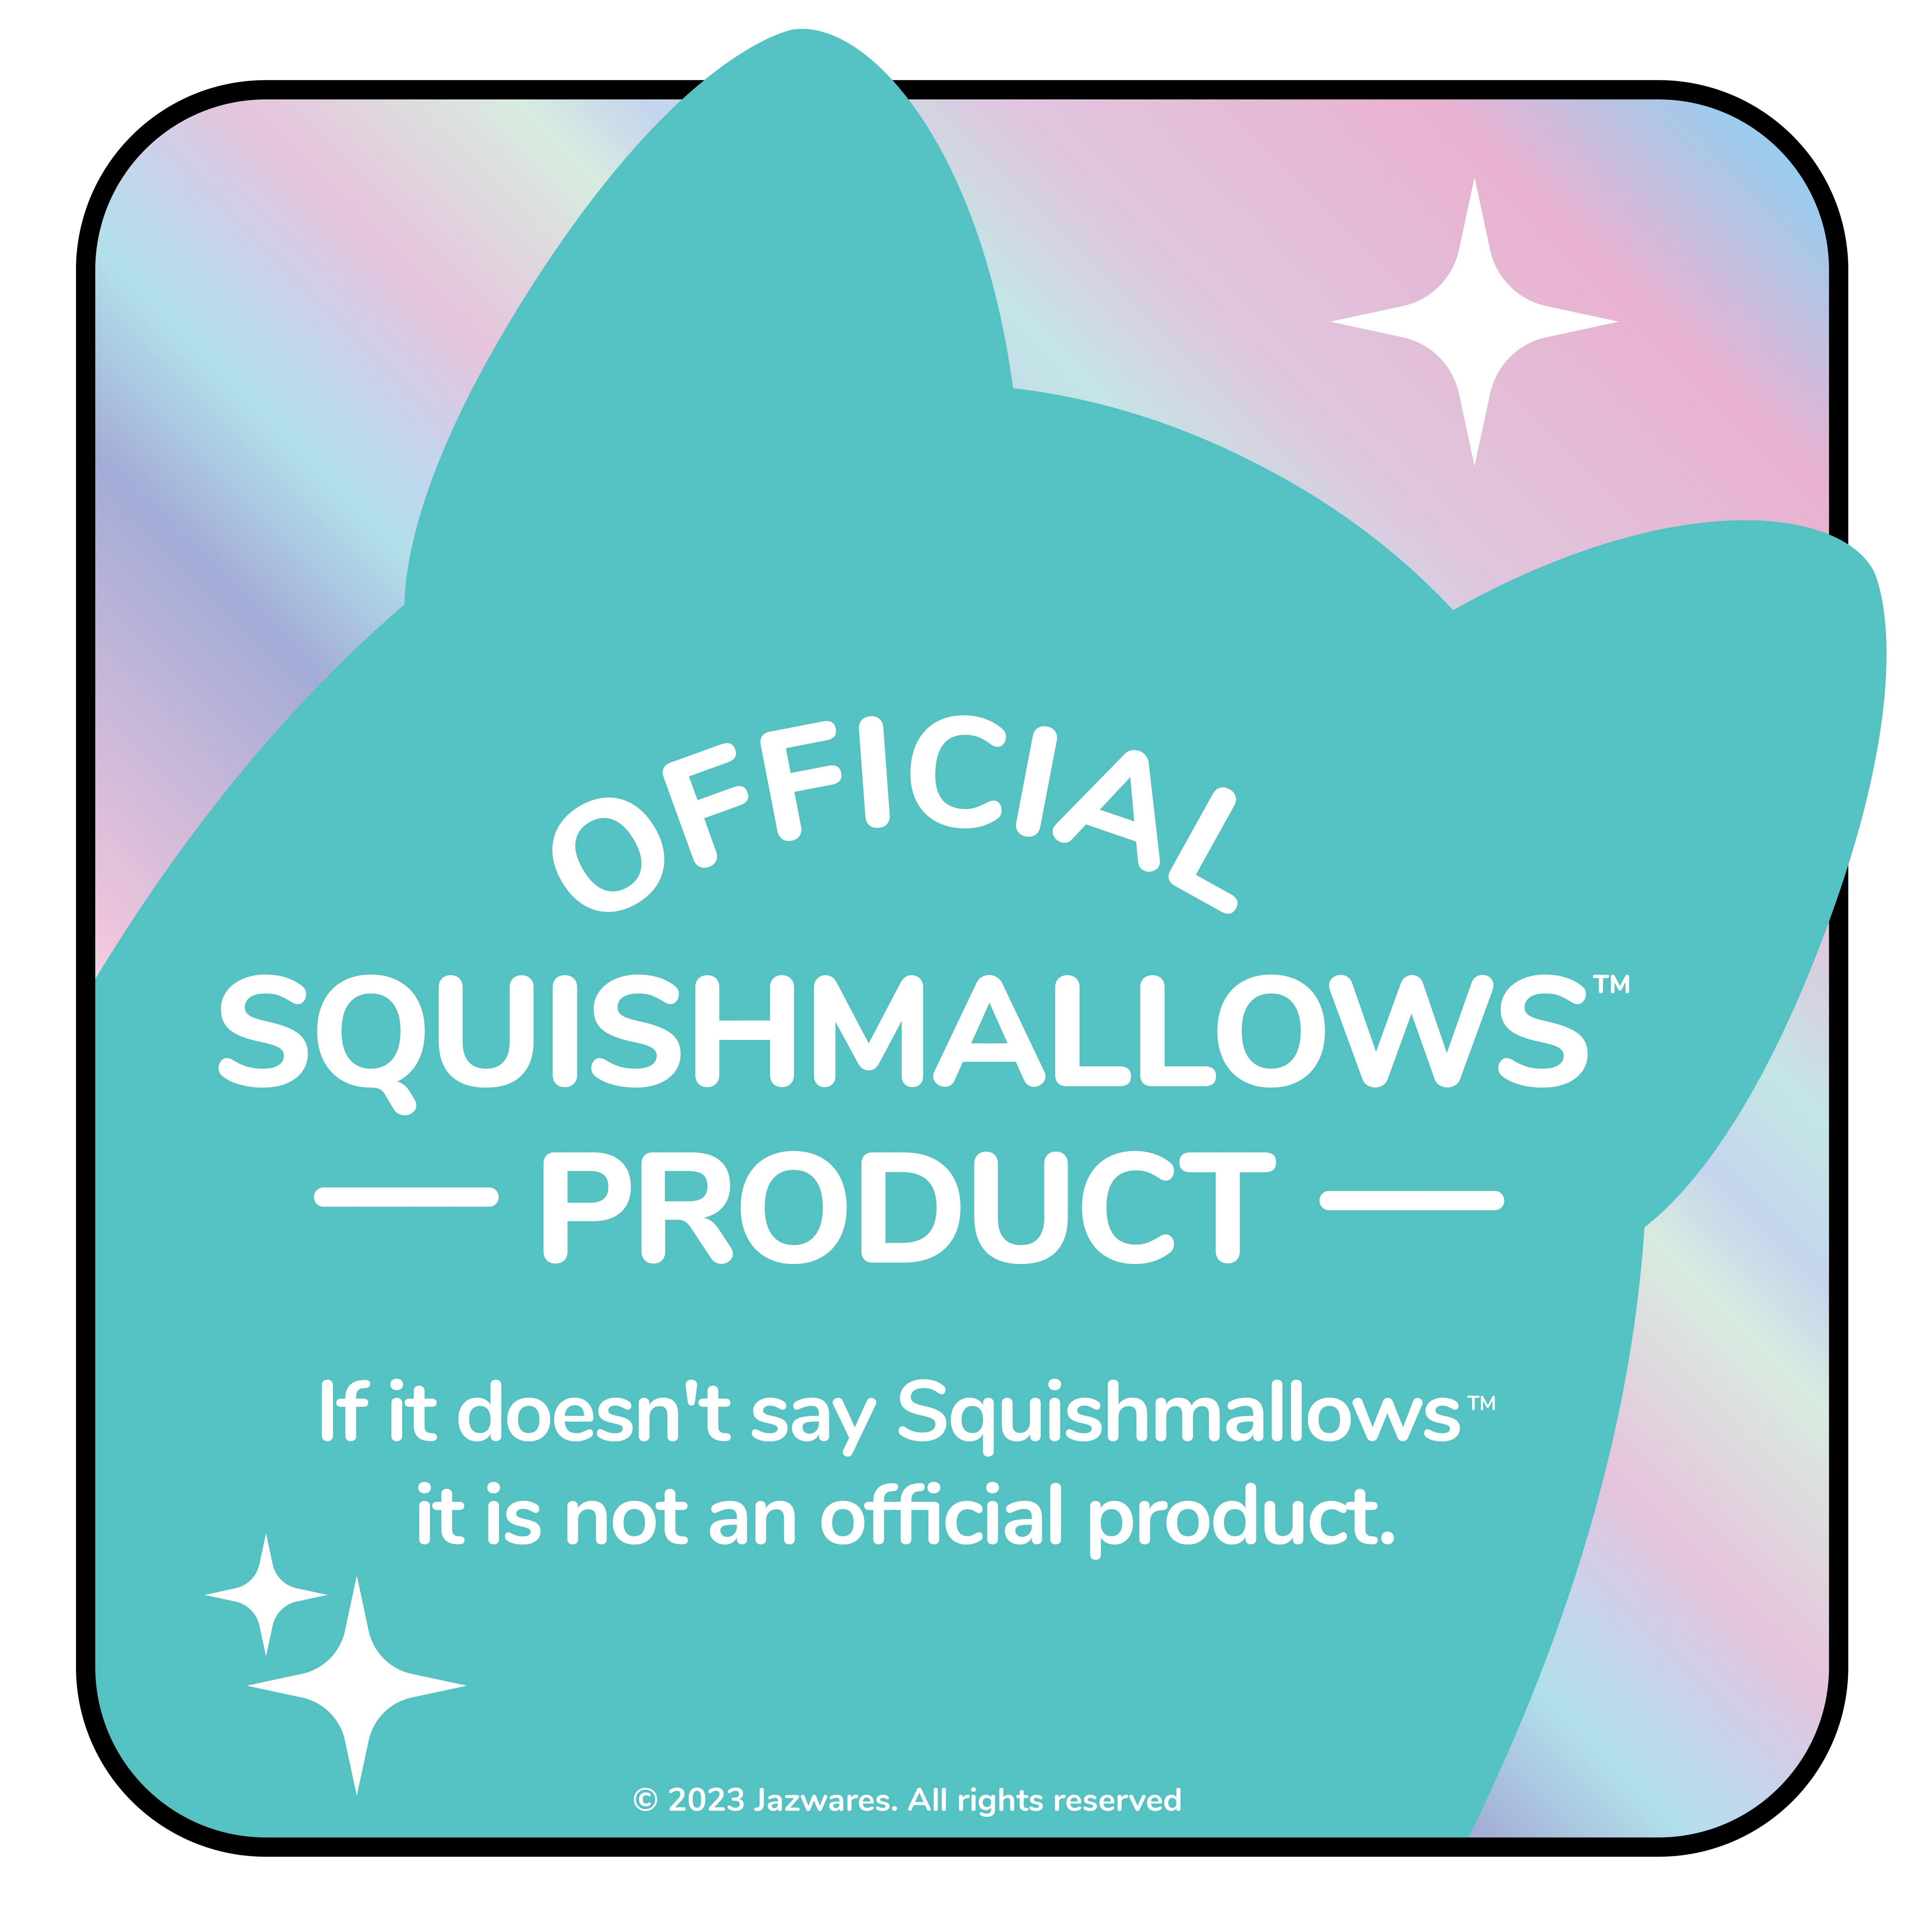 Where to buy Squishmallows online in 2023